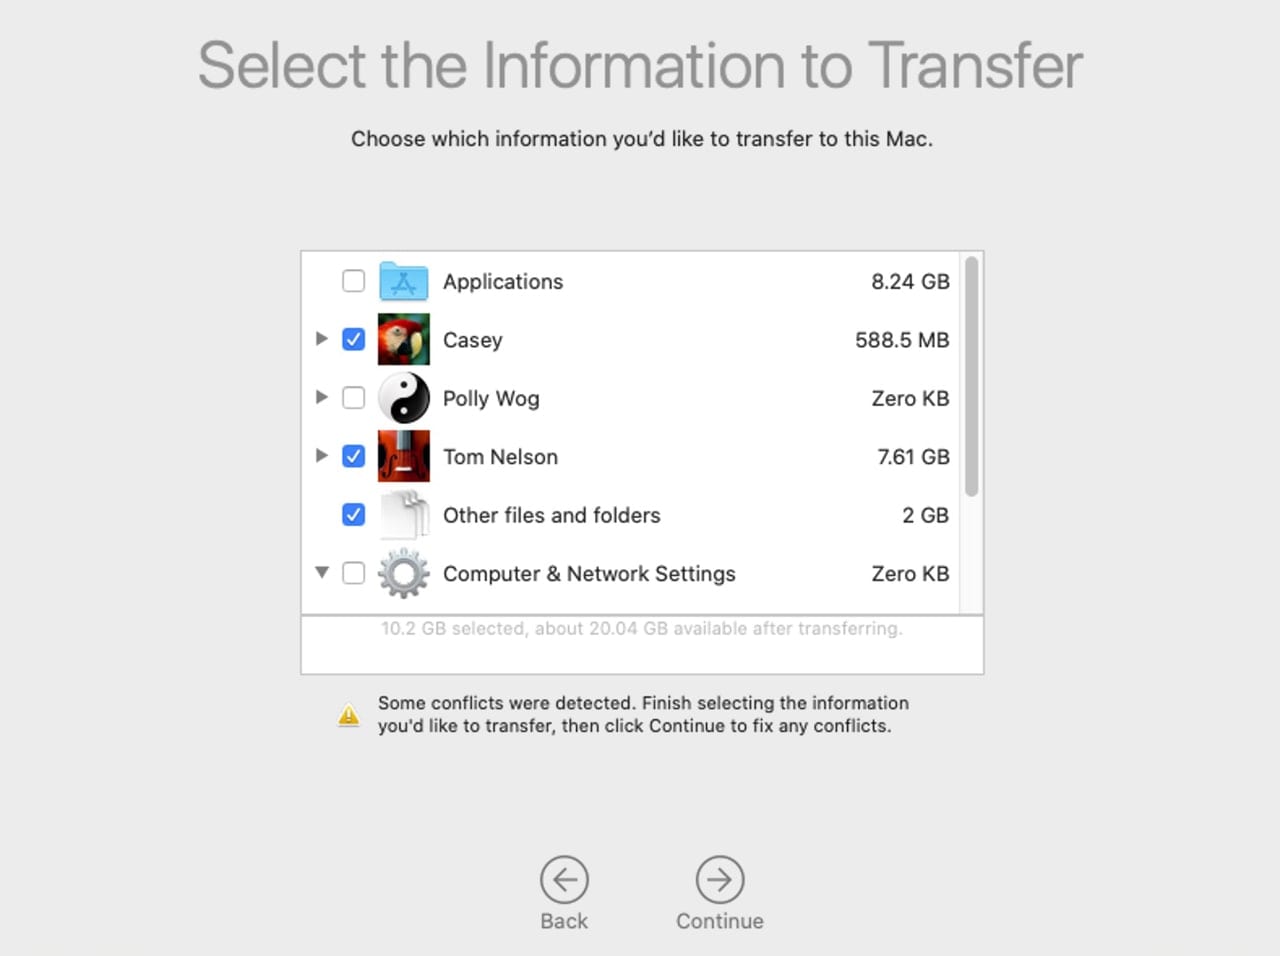 Select the information you wish to transfer using Migration Assistant.